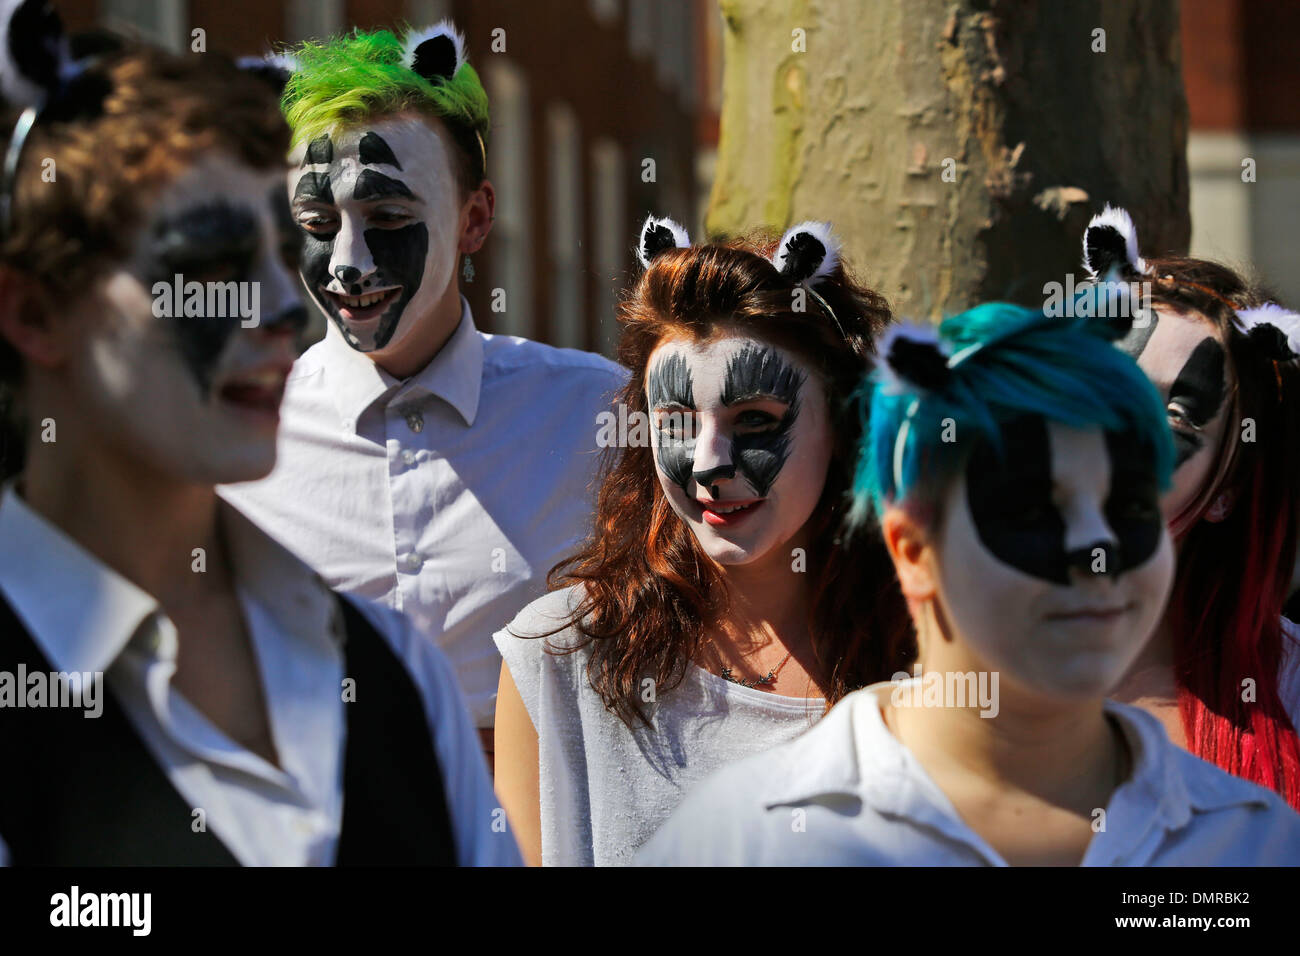 Face-paint wearing campaigners, opposed to the Government's proposed badger cull in England, stage a demonstration Stock Photo